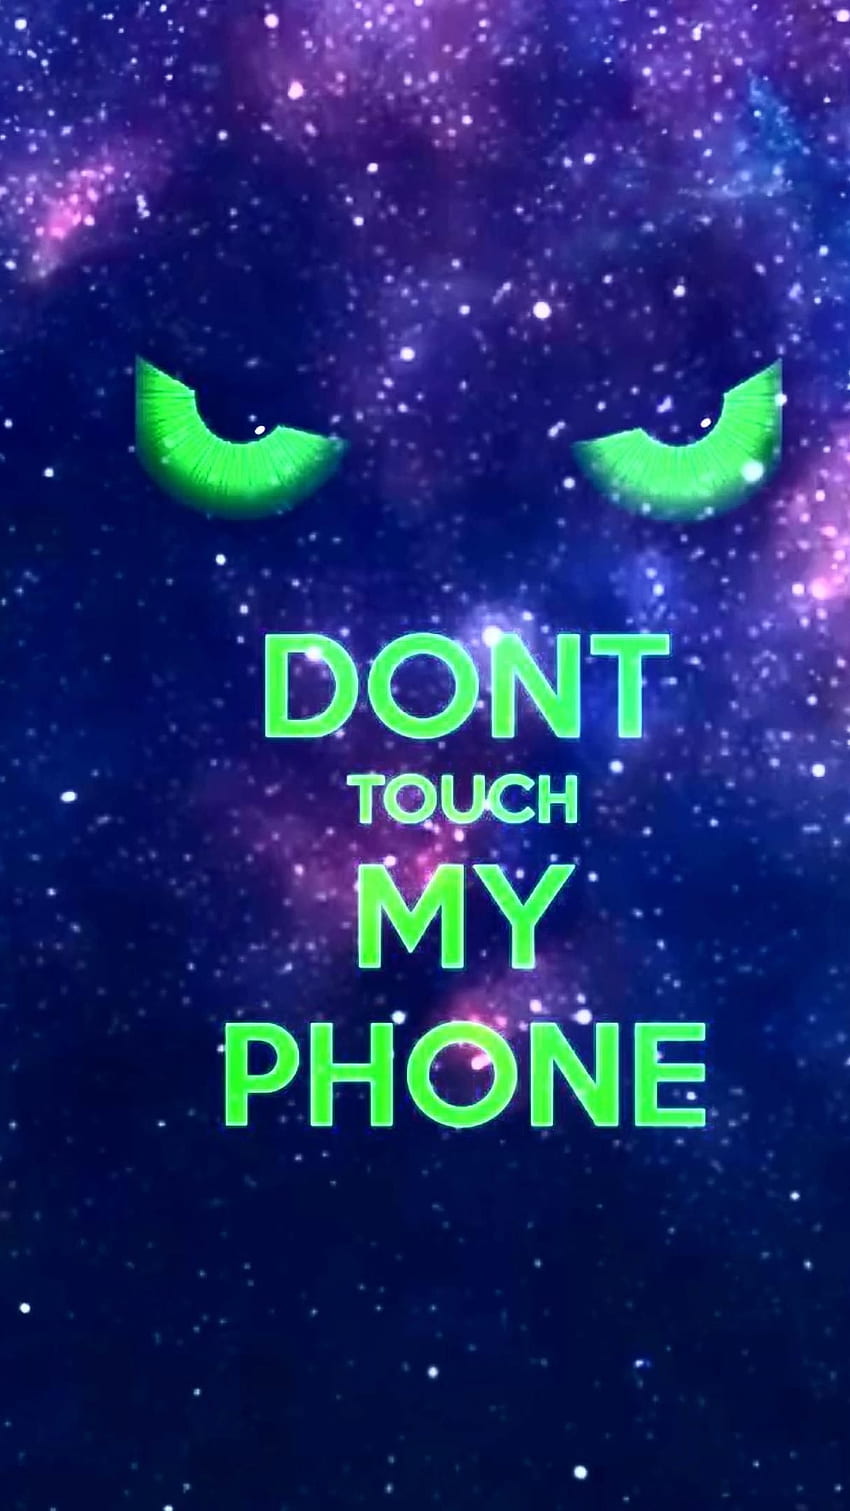 Dont Touch My Phone live, Mobile, Aesthetic, dont touch my phone ...